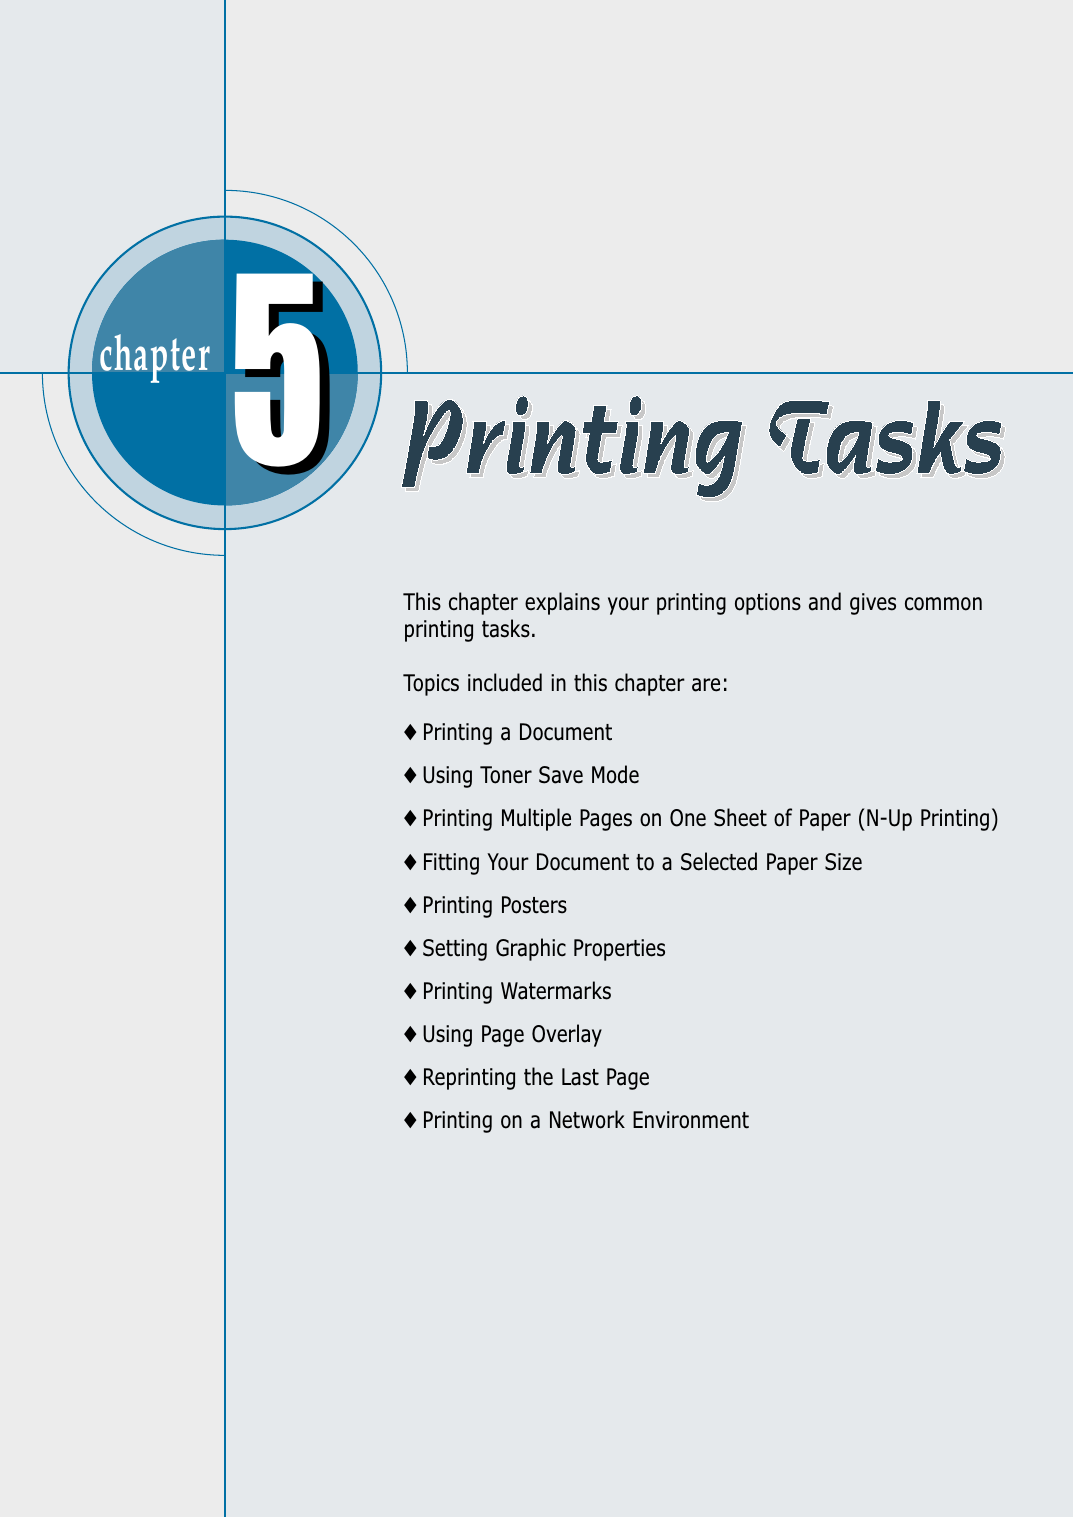 chapter  This chapter explains your printing options and gives commonprinting tasks.Topics included in this chapter are:◆ Printing a Document◆ Using Toner Save Mode◆ Printing Multiple Pages on One Sheet of Paper (N-Up Printing)◆ Fitting Your Document to a Selected Paper Size◆ Printing Posters◆ Setting Graphic Properties◆ Printing Watermarks◆ Using Page Overlay◆ Reprinting the Last Page◆ Printing on a Network Environment55